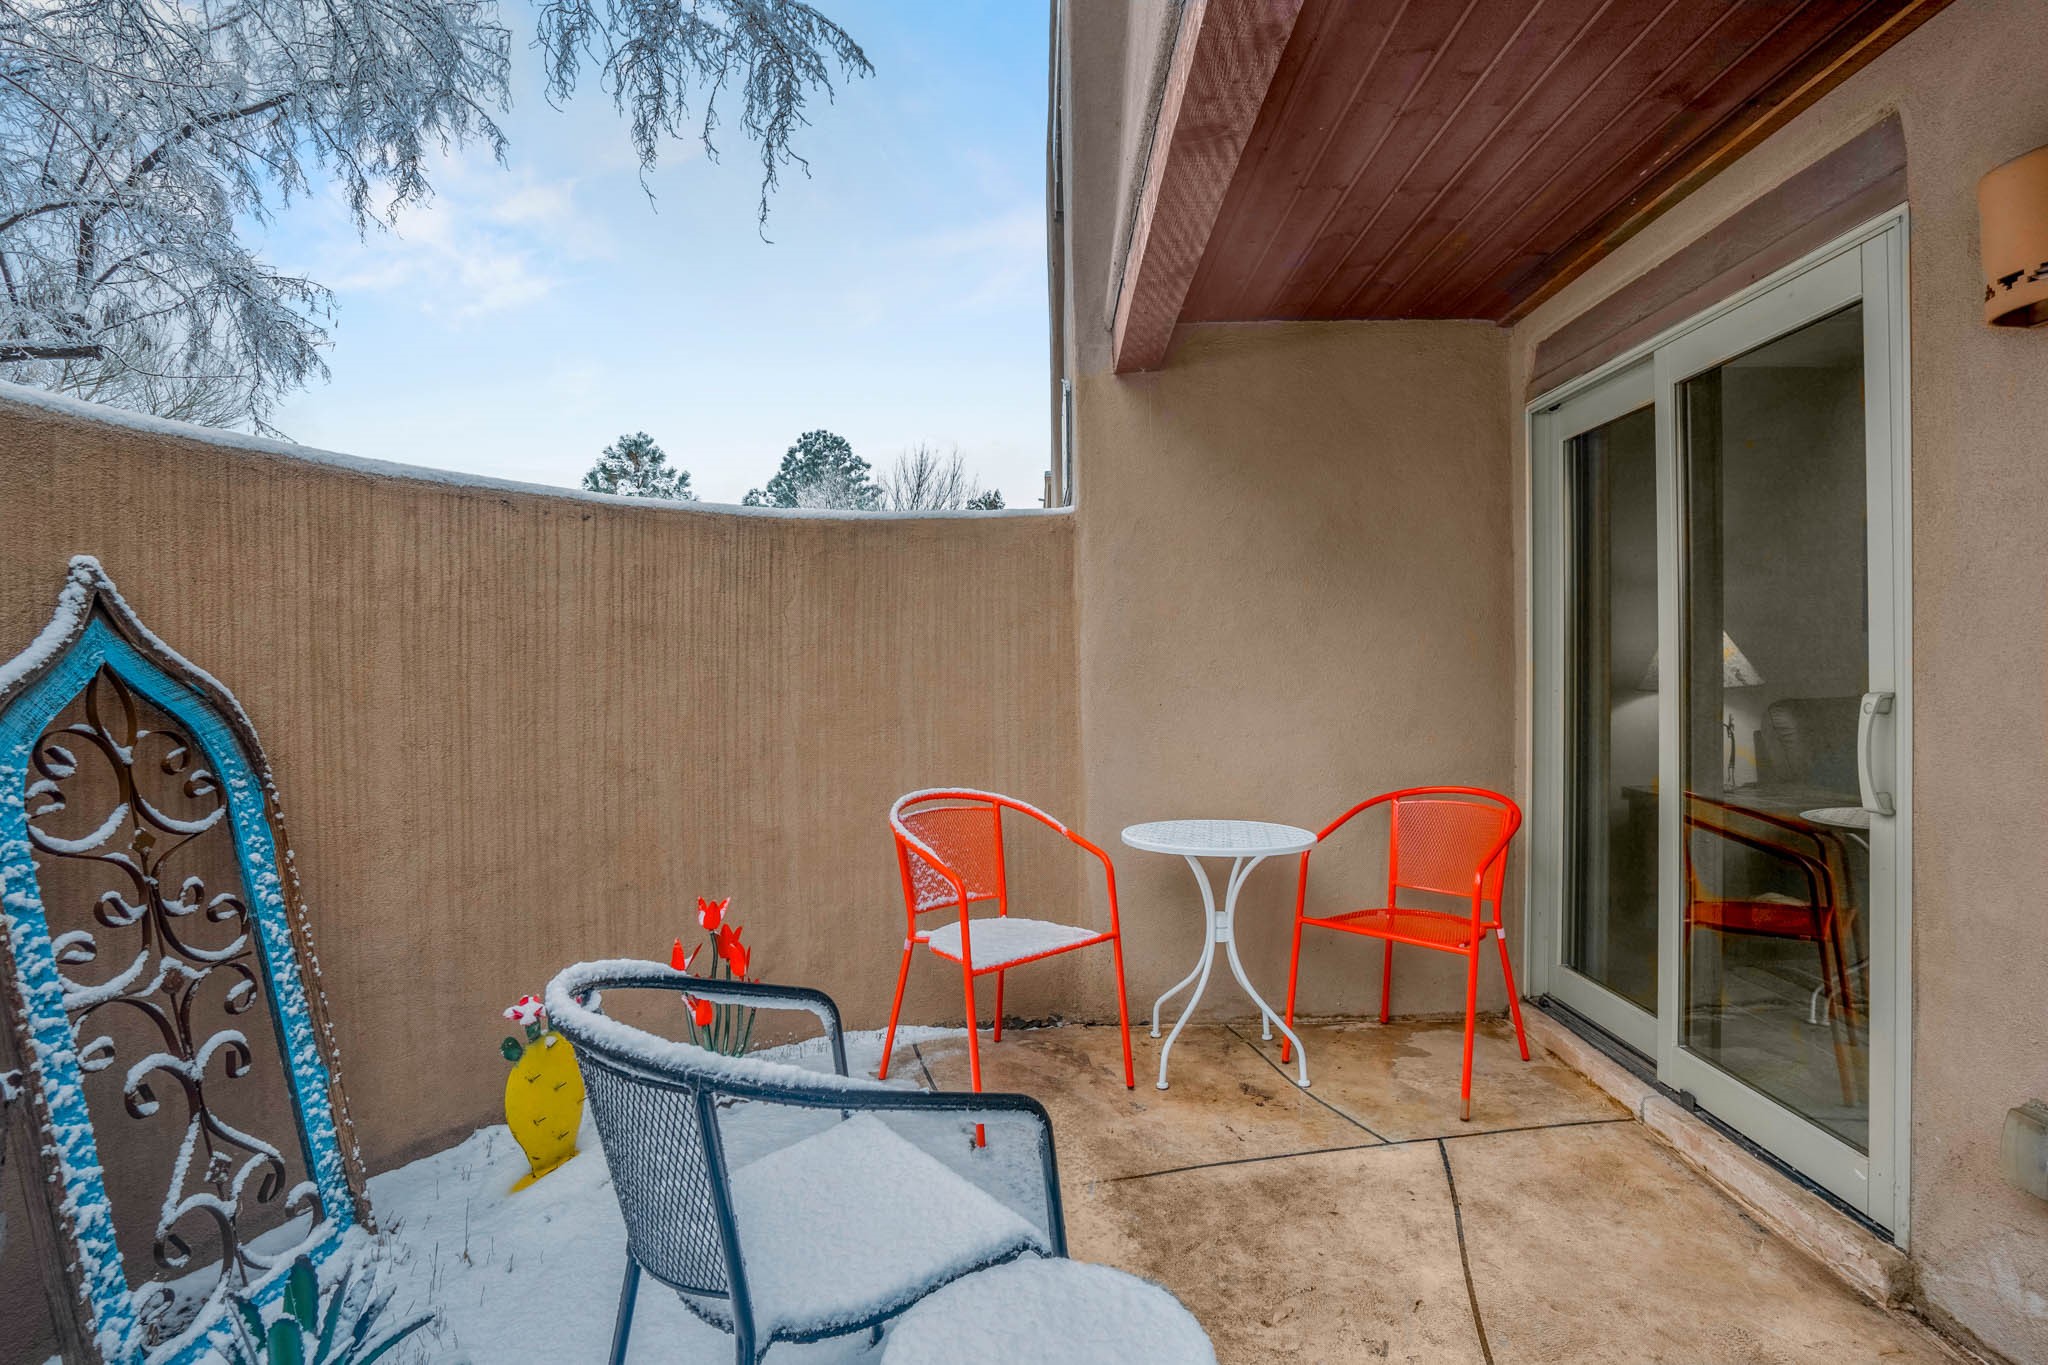 601 W San Mateo 76, Santa Fe, New Mexico 87505, 2 Bedrooms Bedrooms, ,2 BathroomsBathrooms,Residential,For Sale,601 W San Mateo 76,202234476